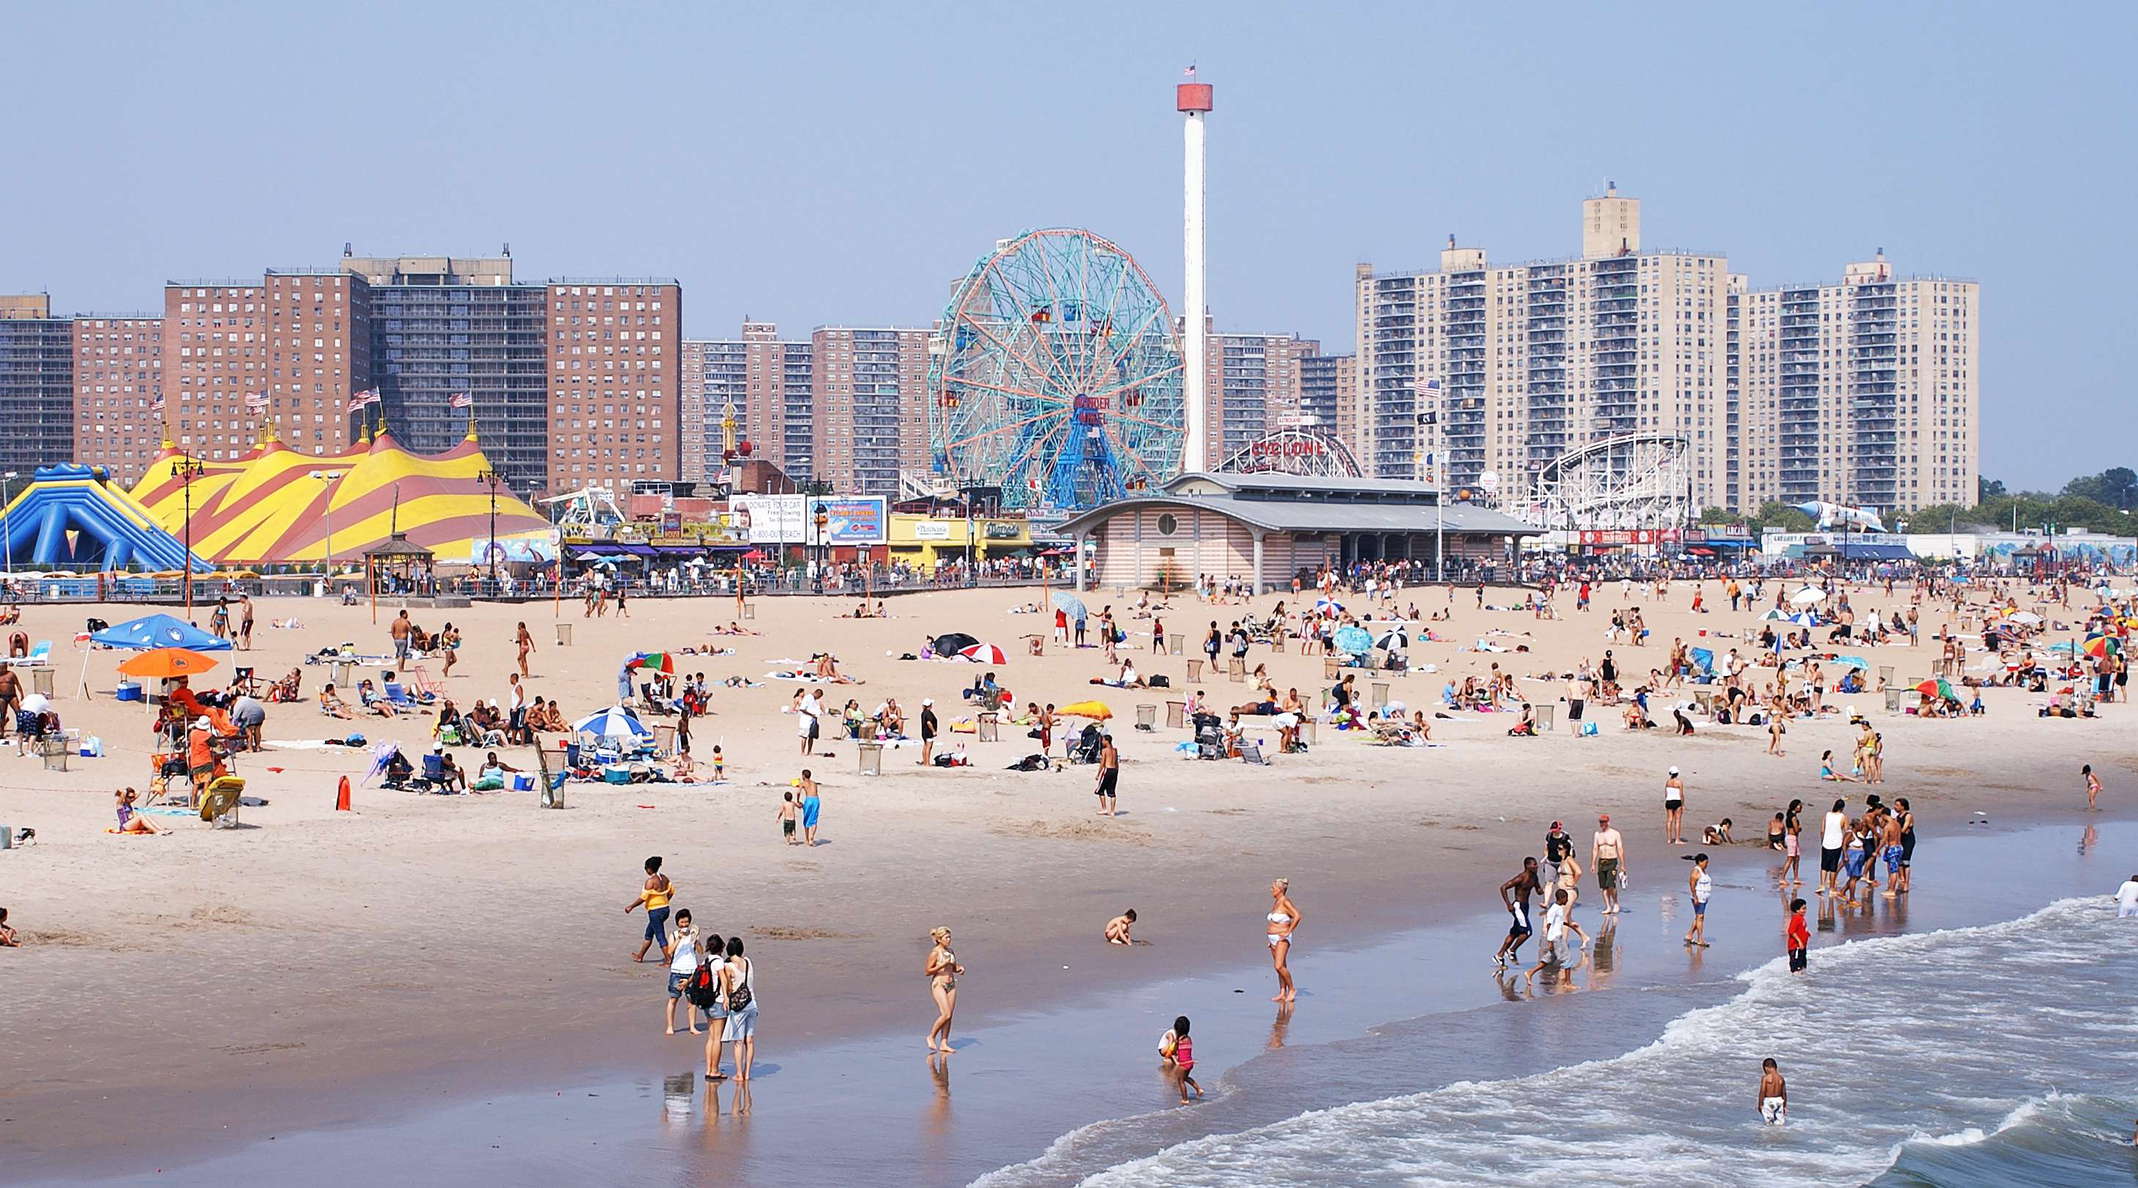 Coney Island with beach and amusement park